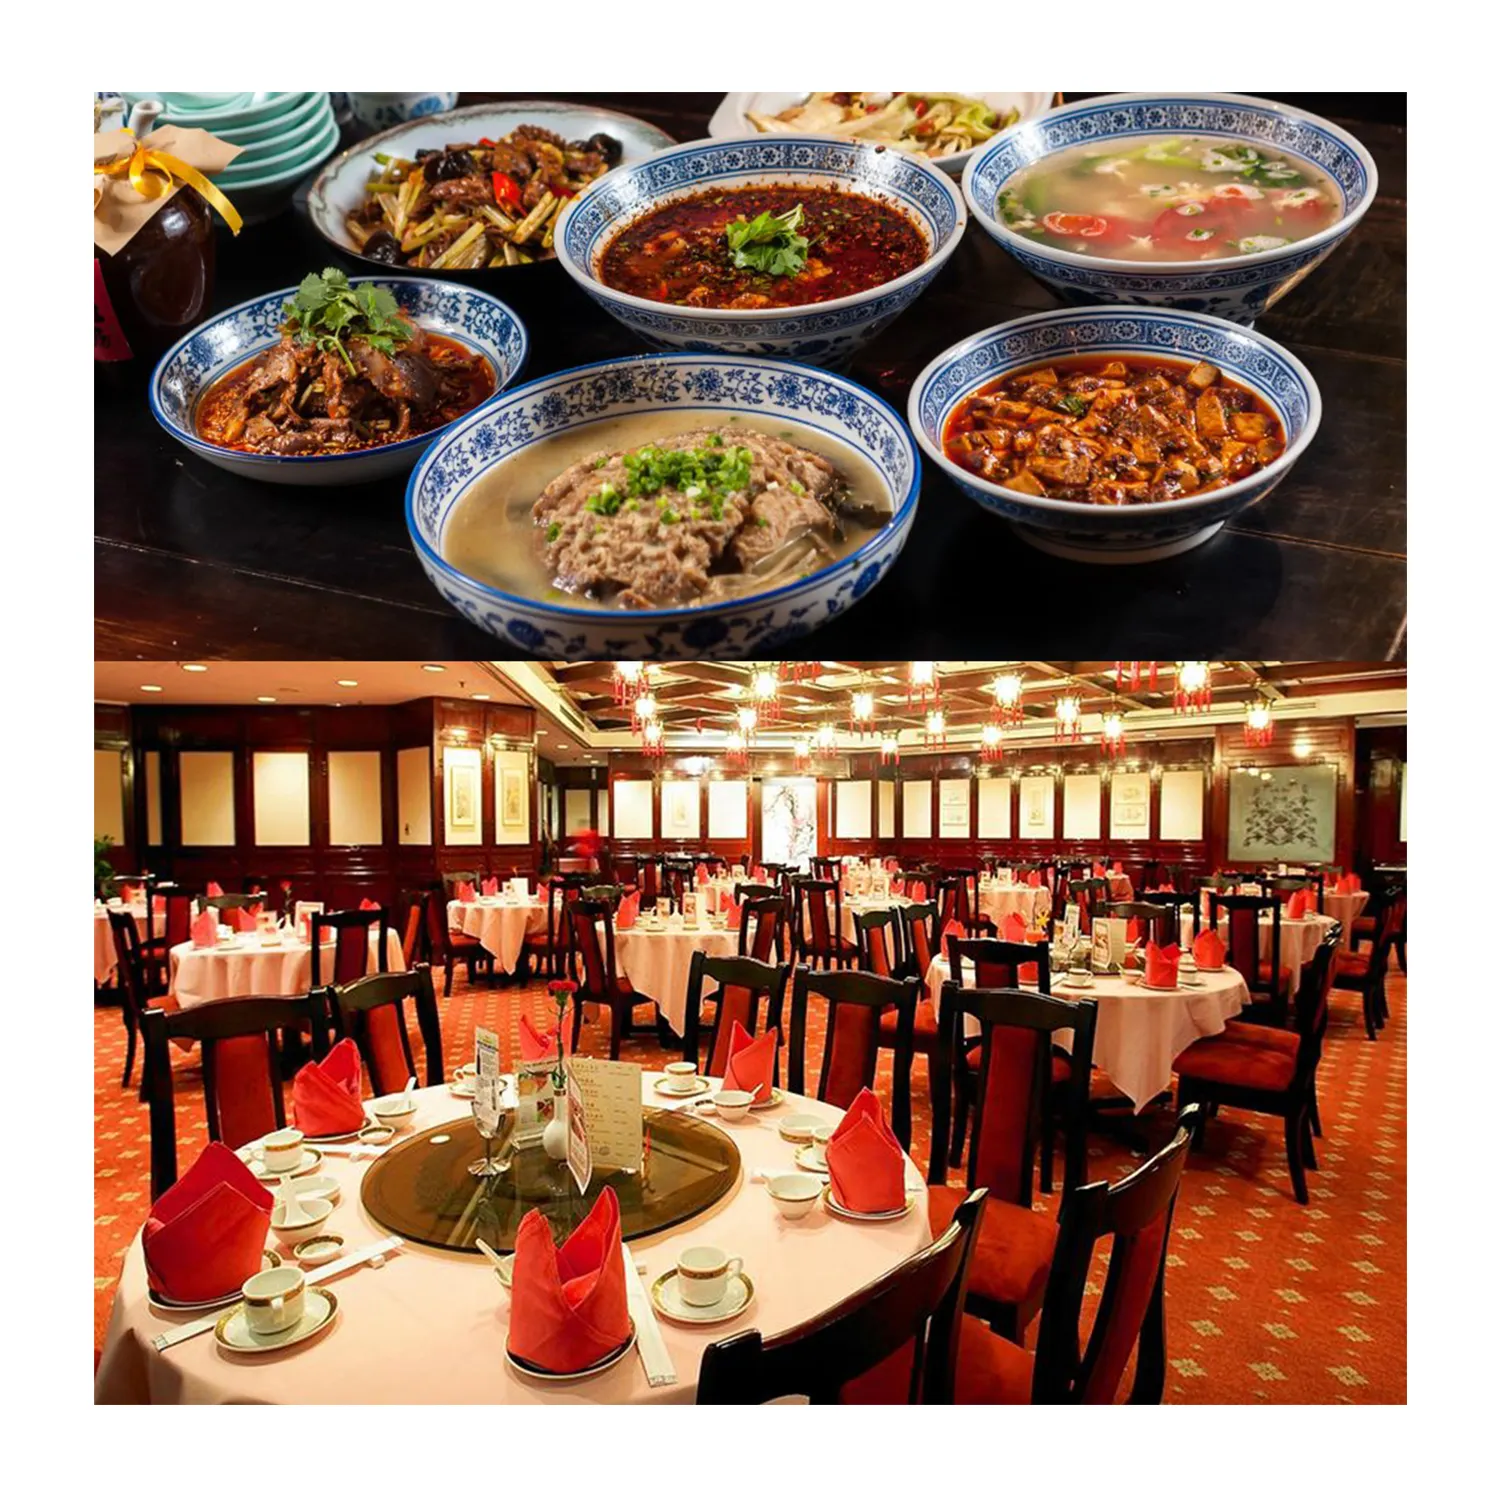 Hotels Catering Stainless Buffet And Suppliers Star Hotel Steel Electrical Kitchen Restaurant Equipment For Chinese Food